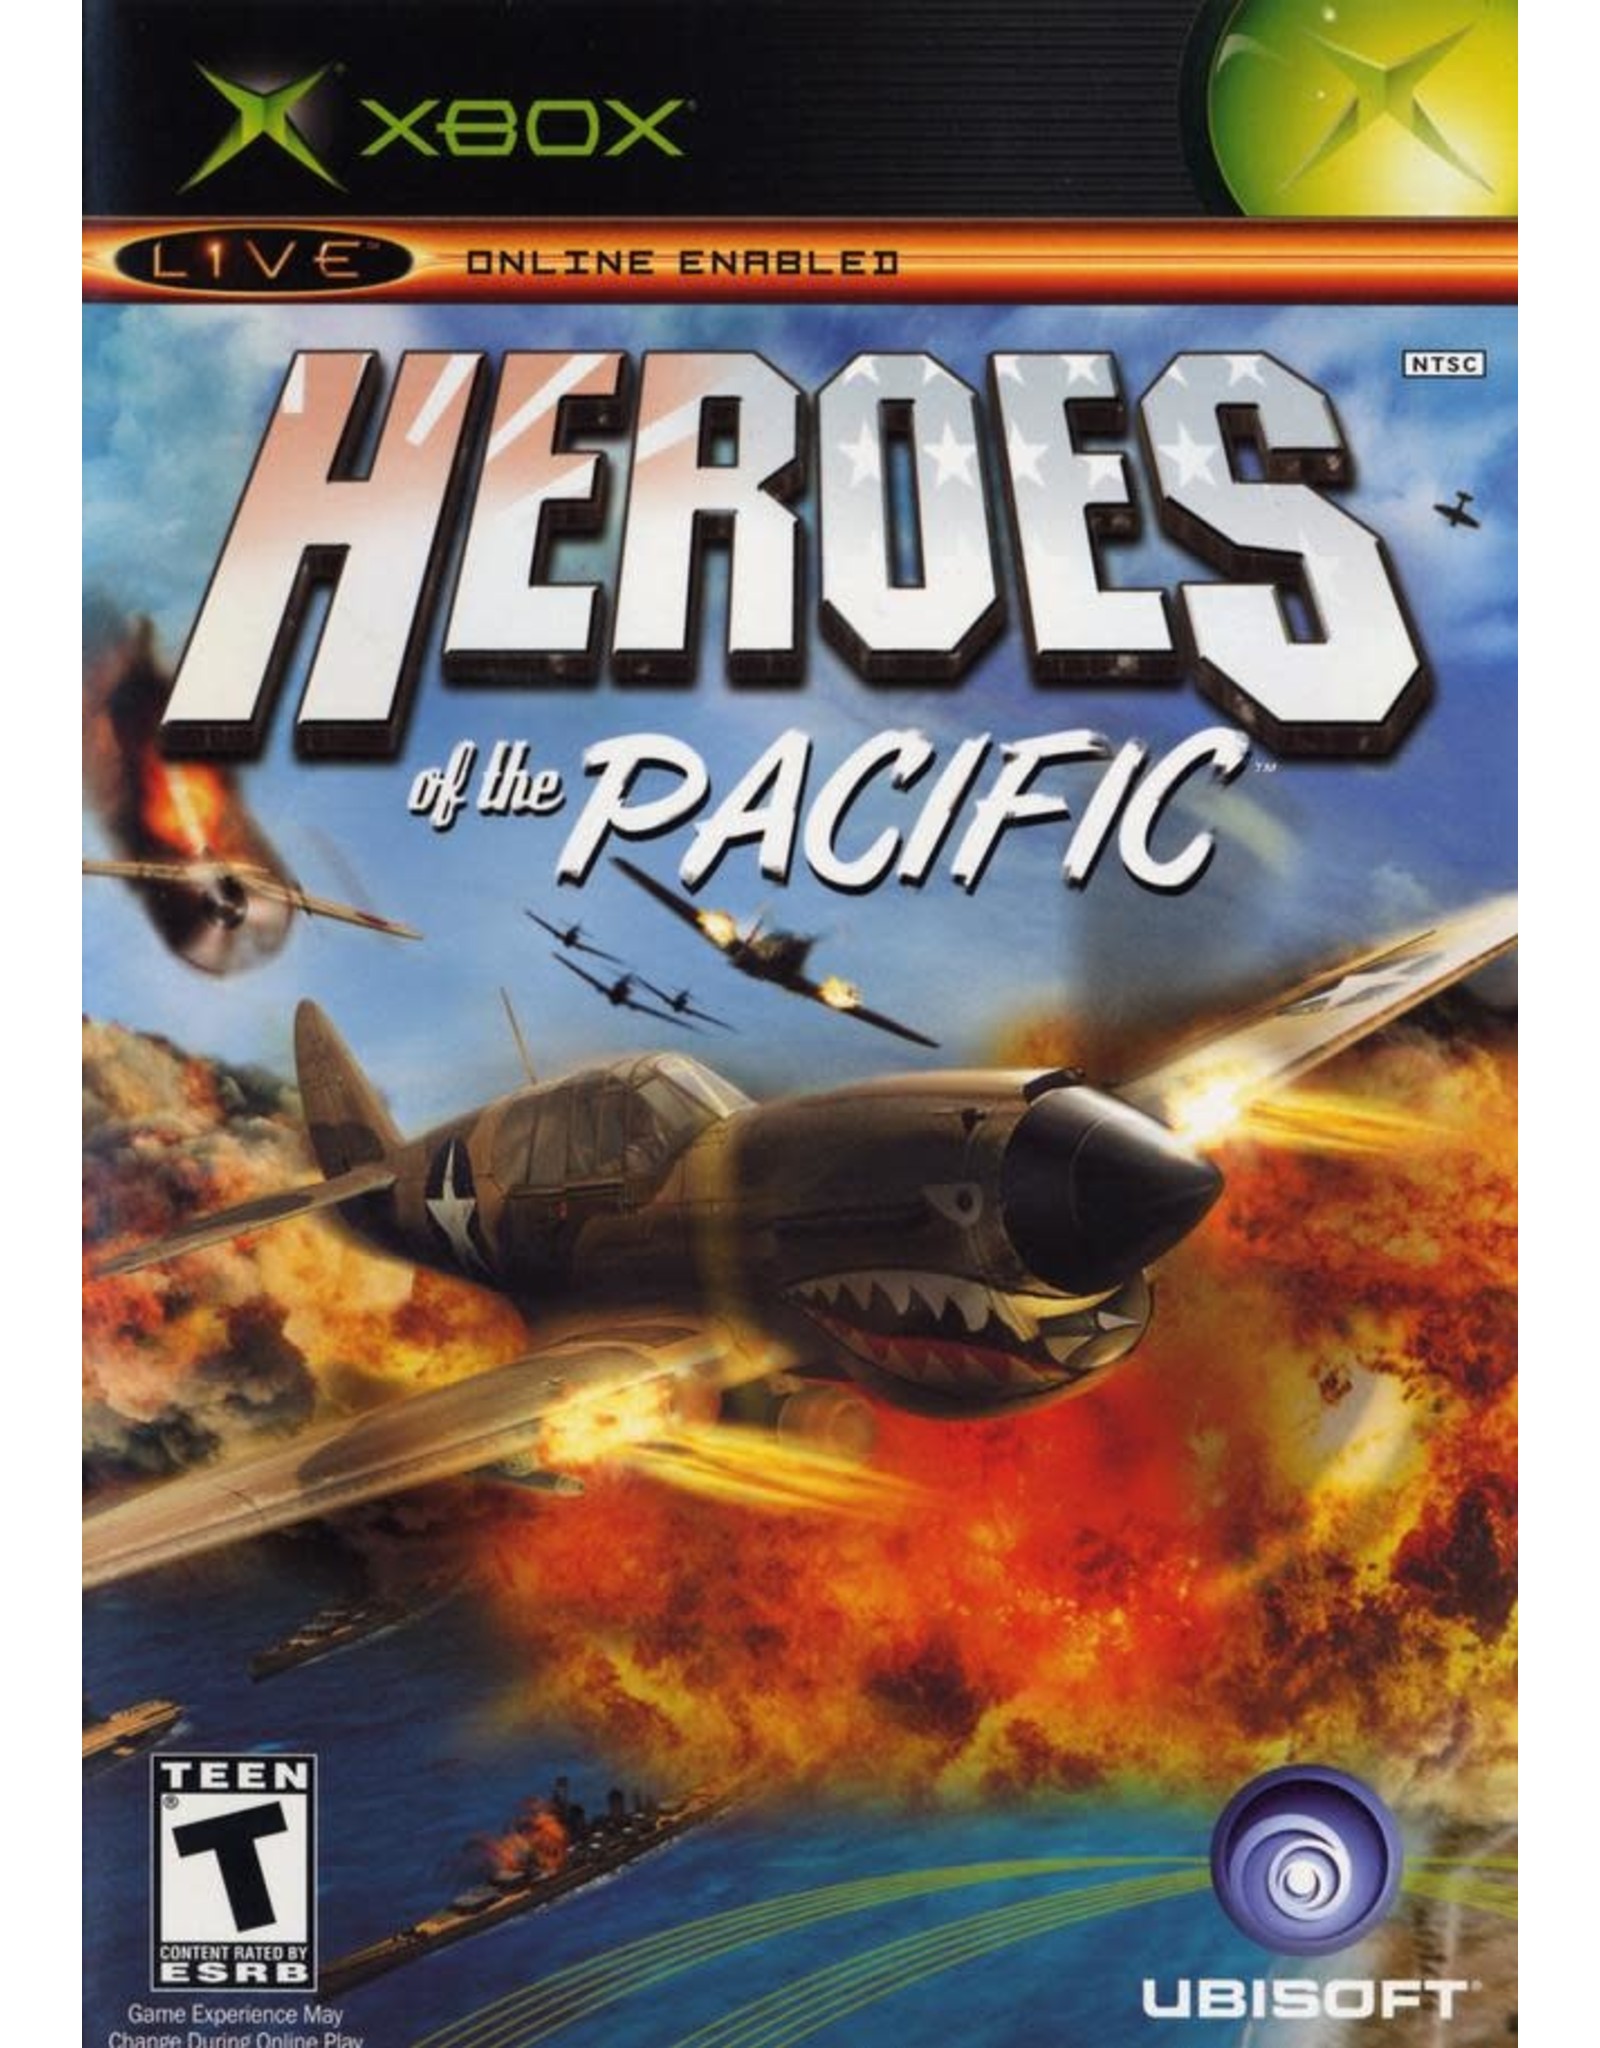 Xbox Heroes of the Pacific (CiB)